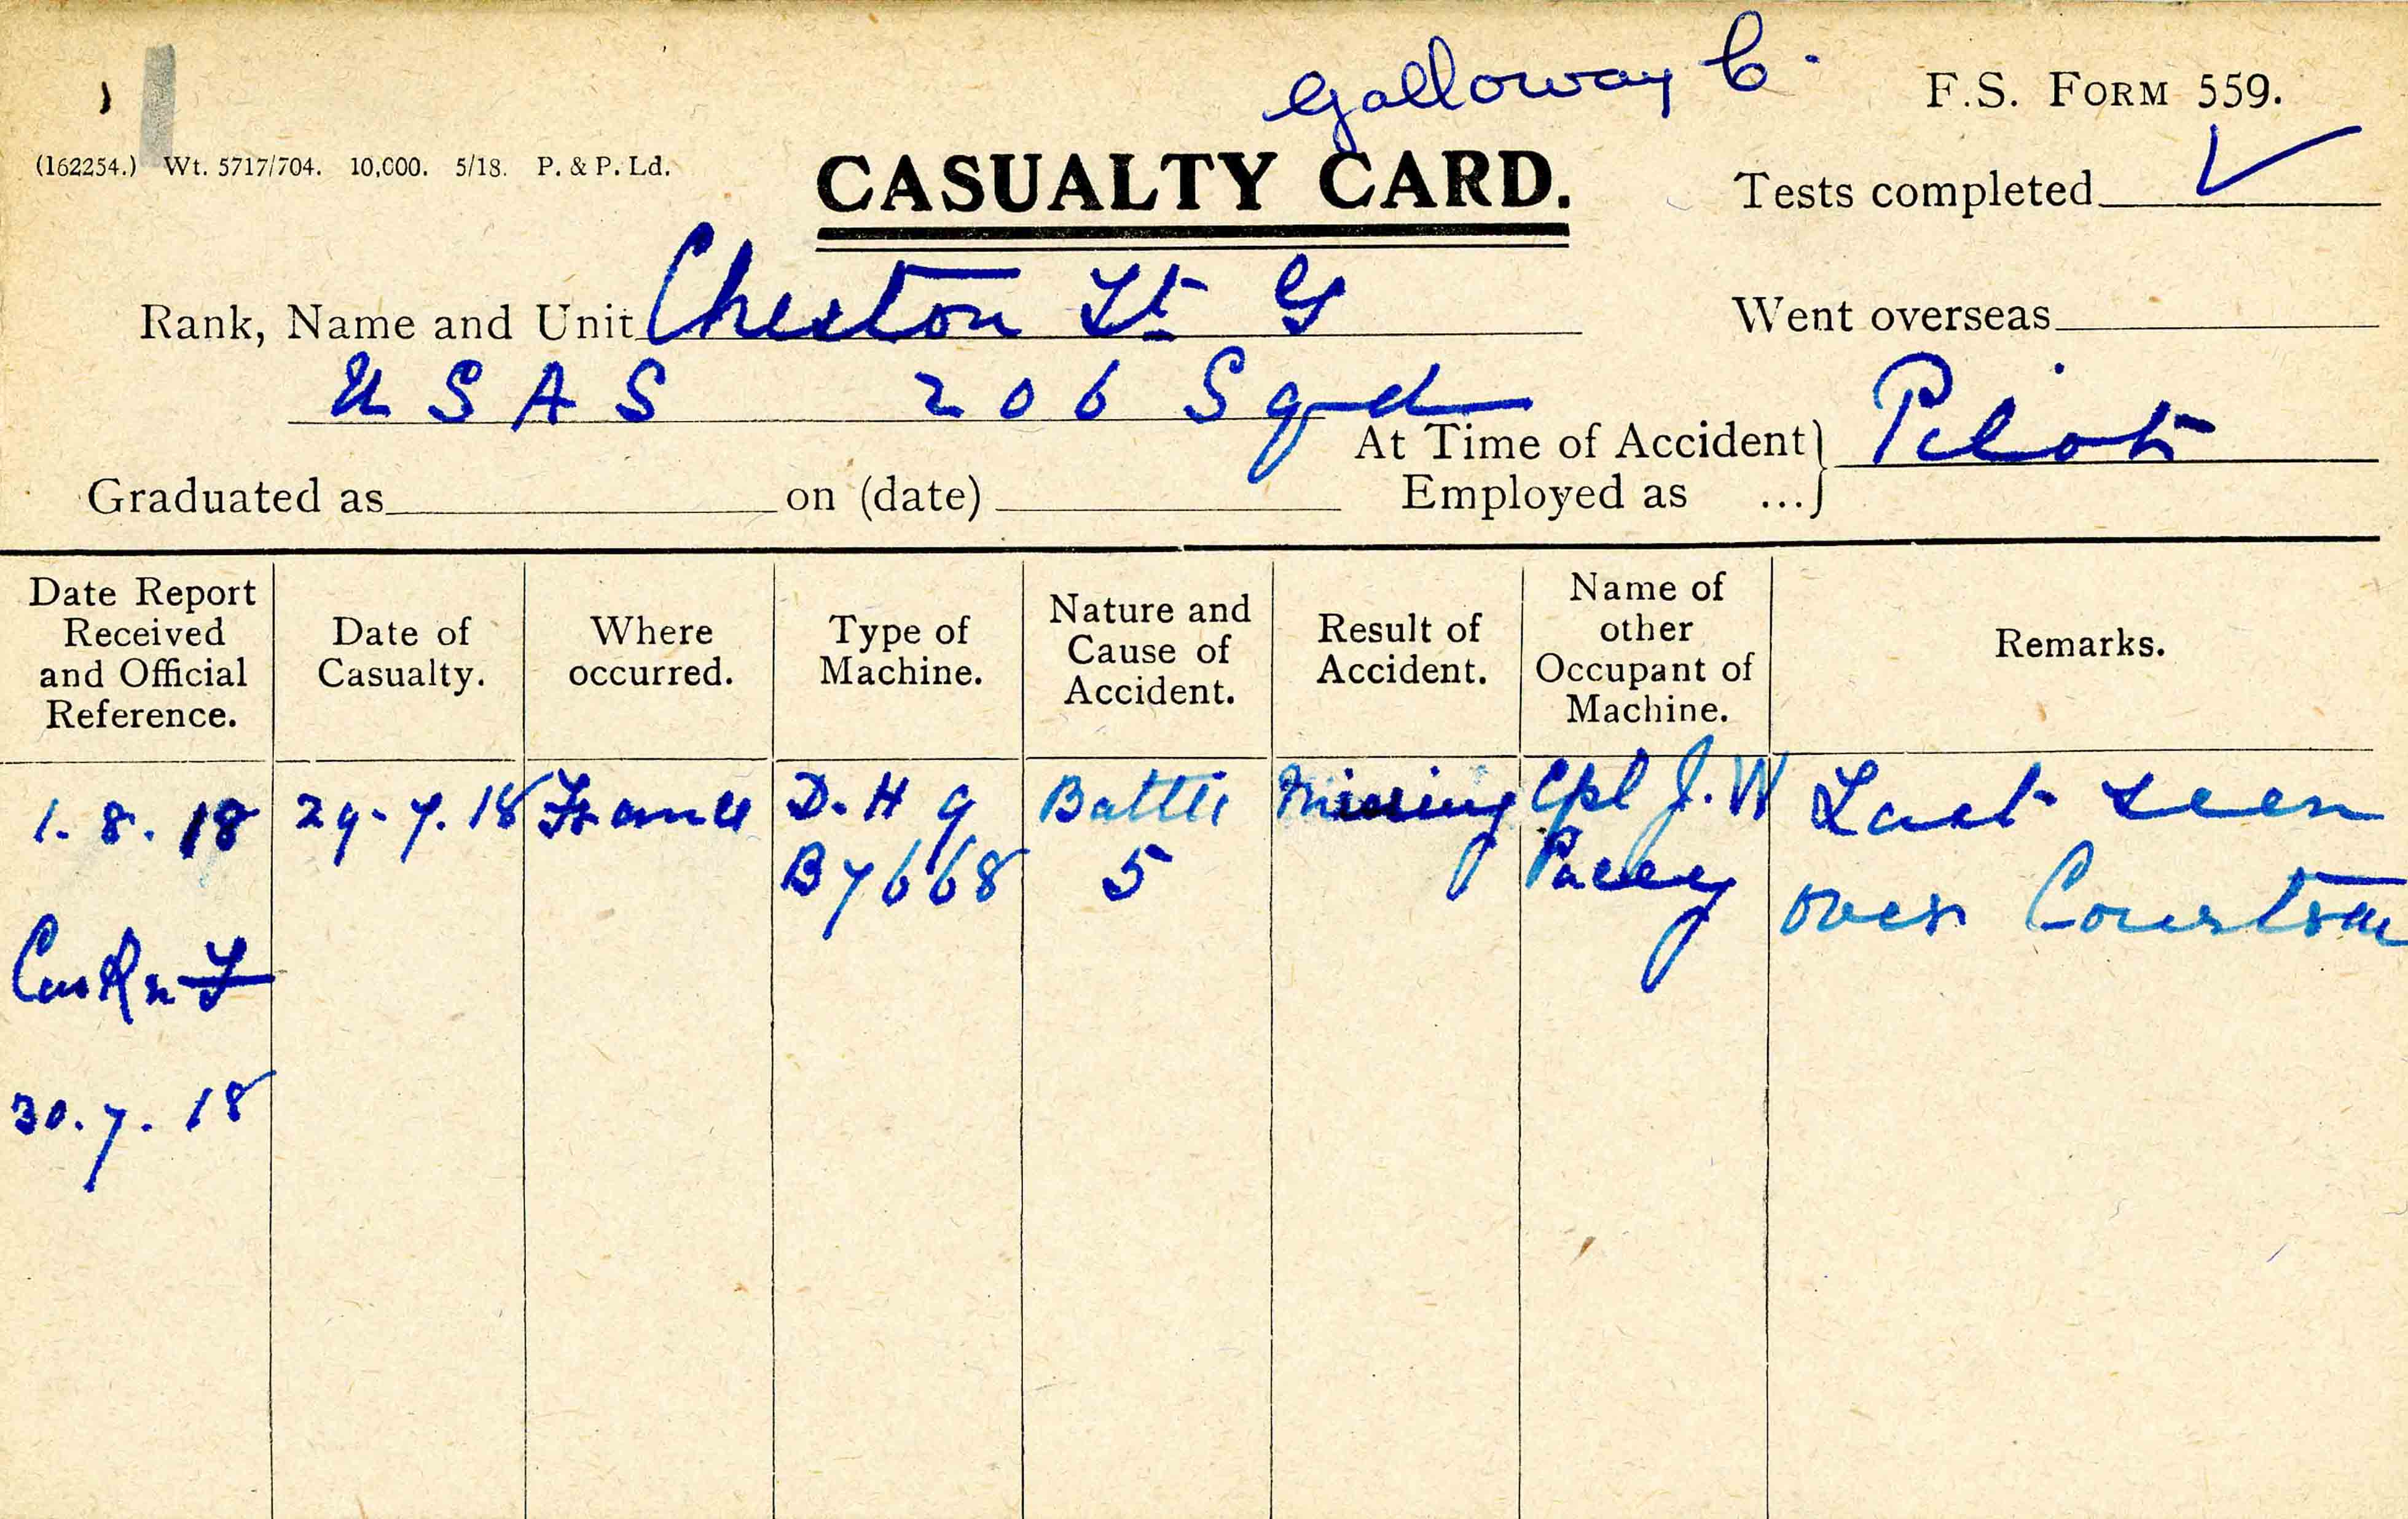 A printed card with information about Cheston's disappearance on July 29, 1918, filled in in blue ink.